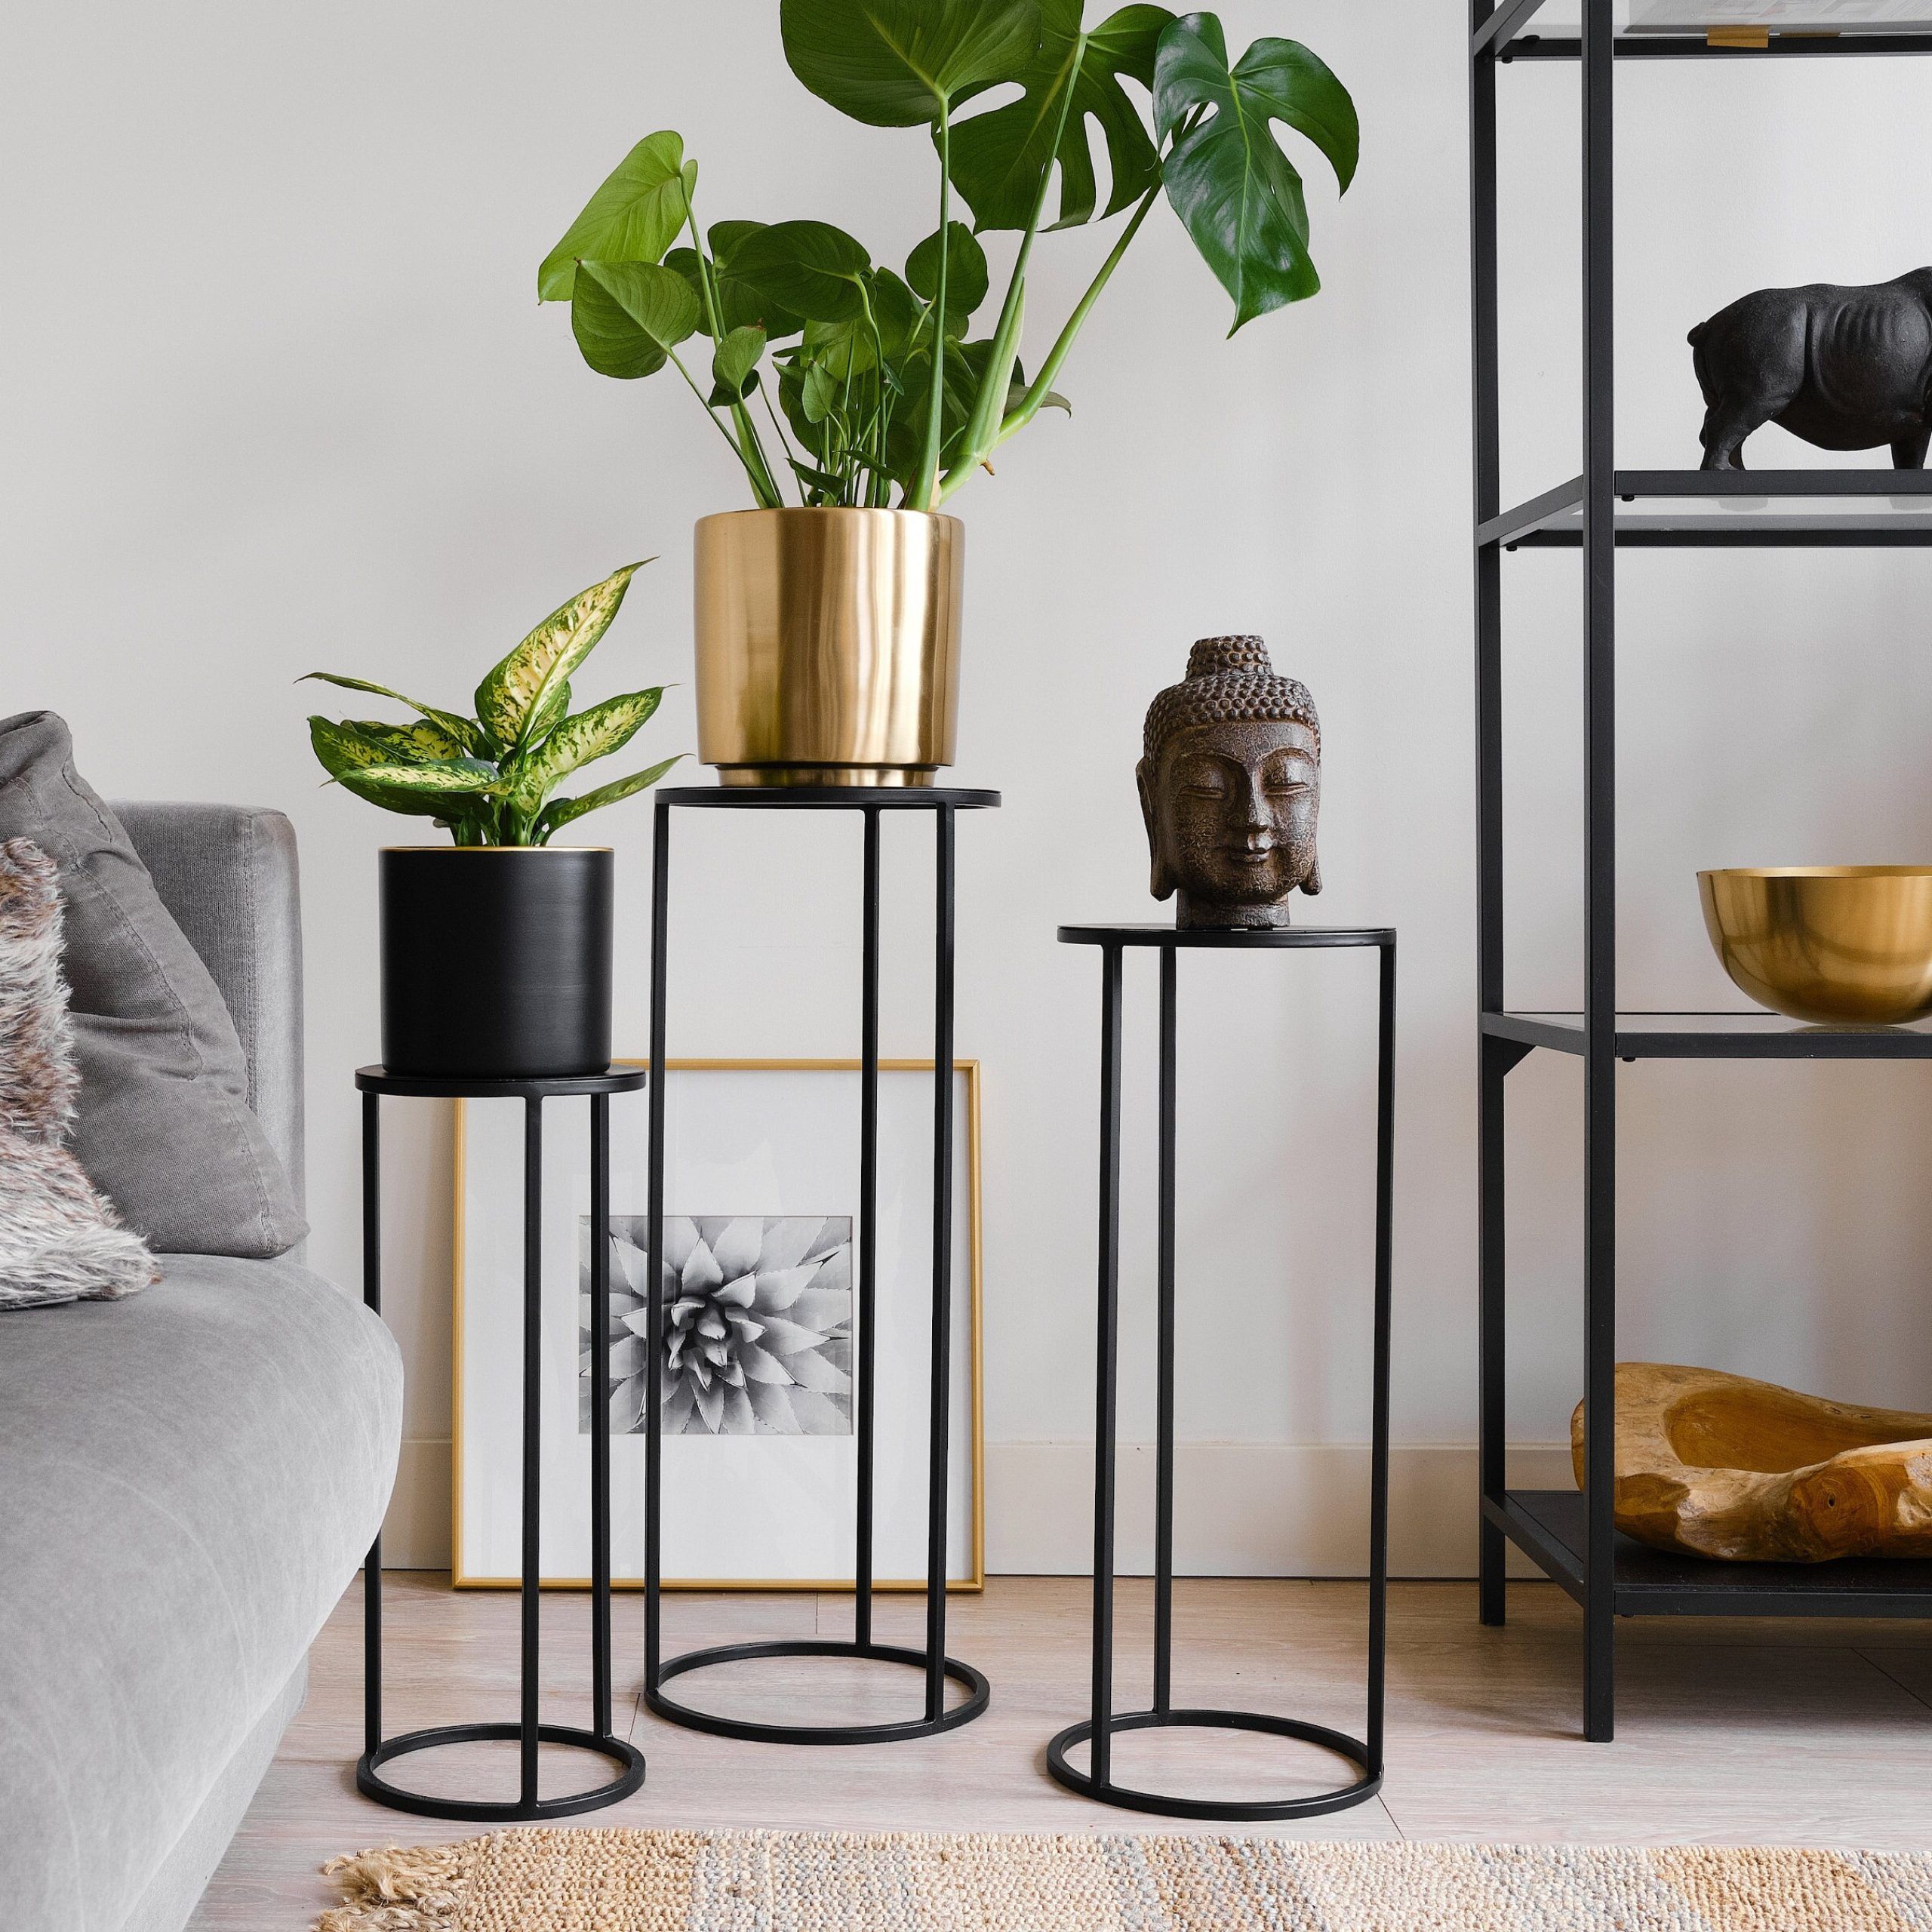 Set Of 3 Metal Plant Stand Nesting Display End Table Round – Etsy Inside Most Popular Black Plant Stands (View 8 of 15)